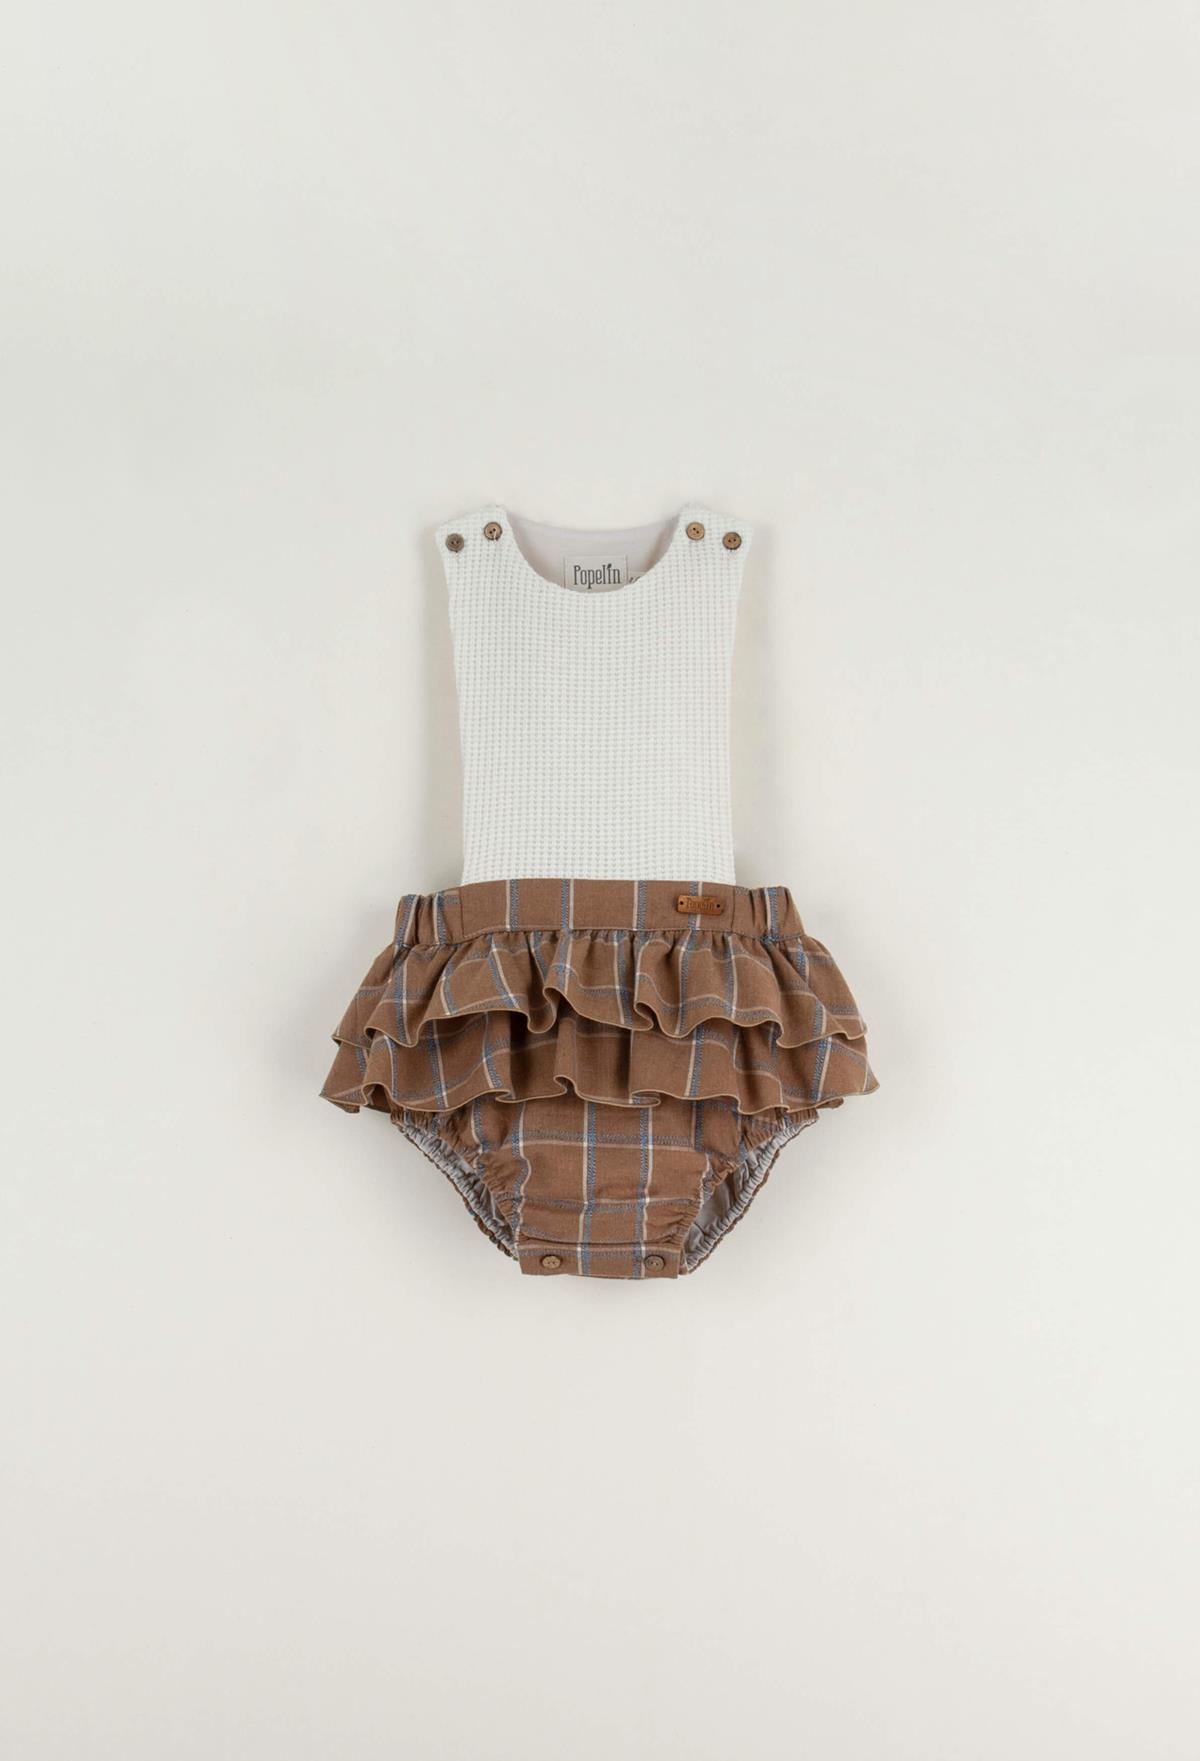 Mod.1.4 Terracotta plaid embroidered frilled romper suit with bib | AW22.23 Mod.1.4 Terracotta plaid embroidered frilled romper suit with bib